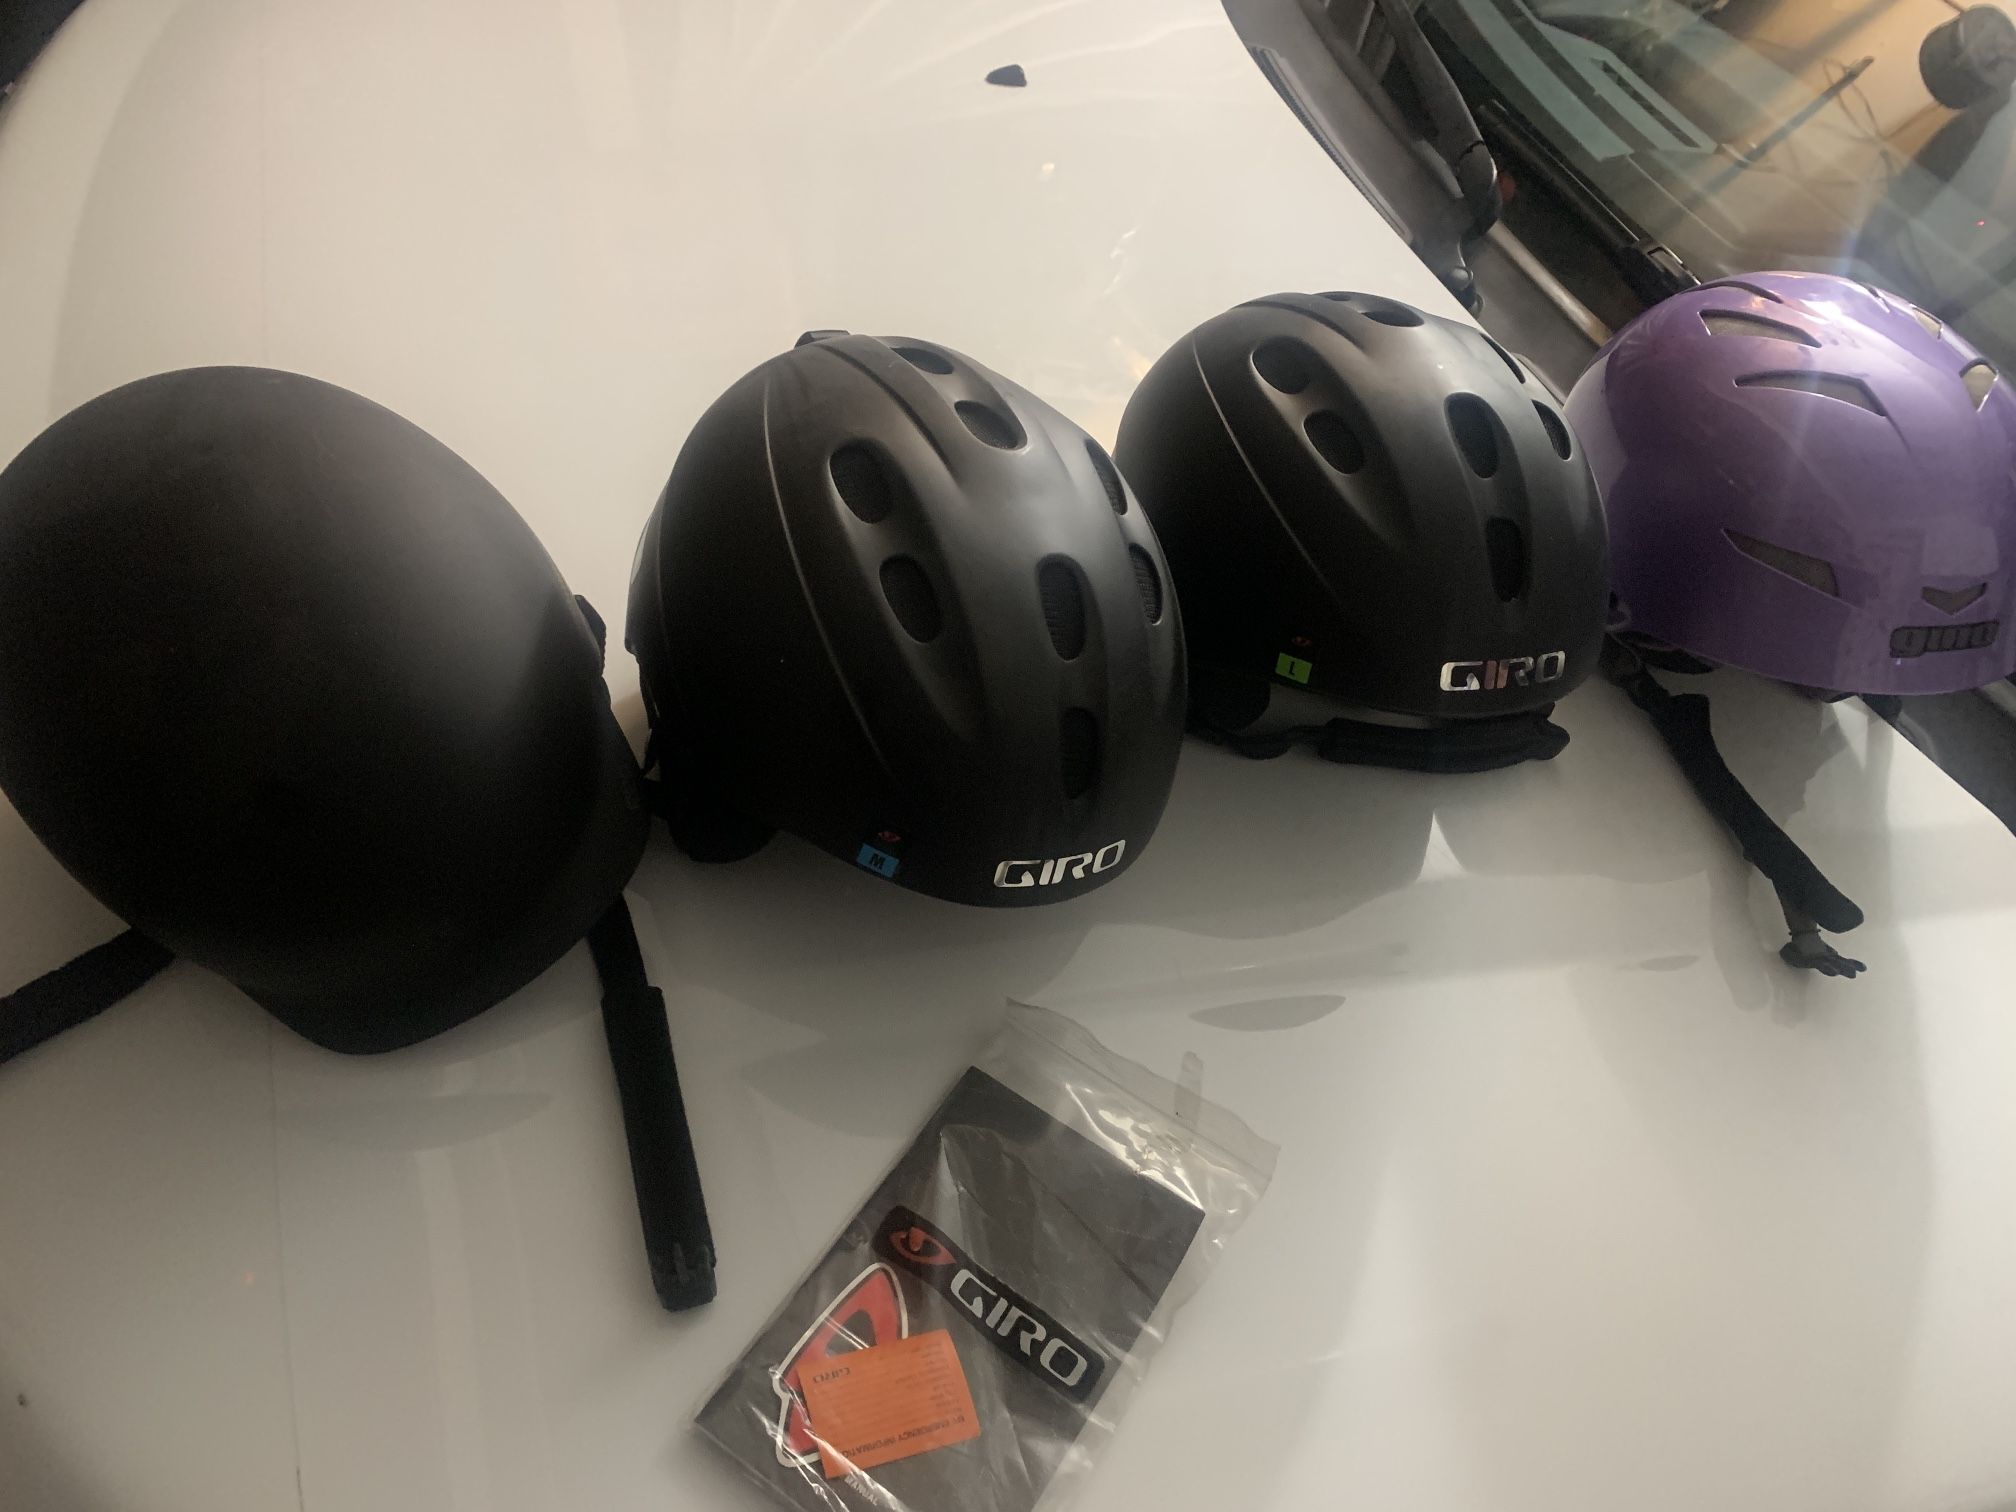 Ski Helmets - All New, Never Worn. From Left To Right XL,M,L,L